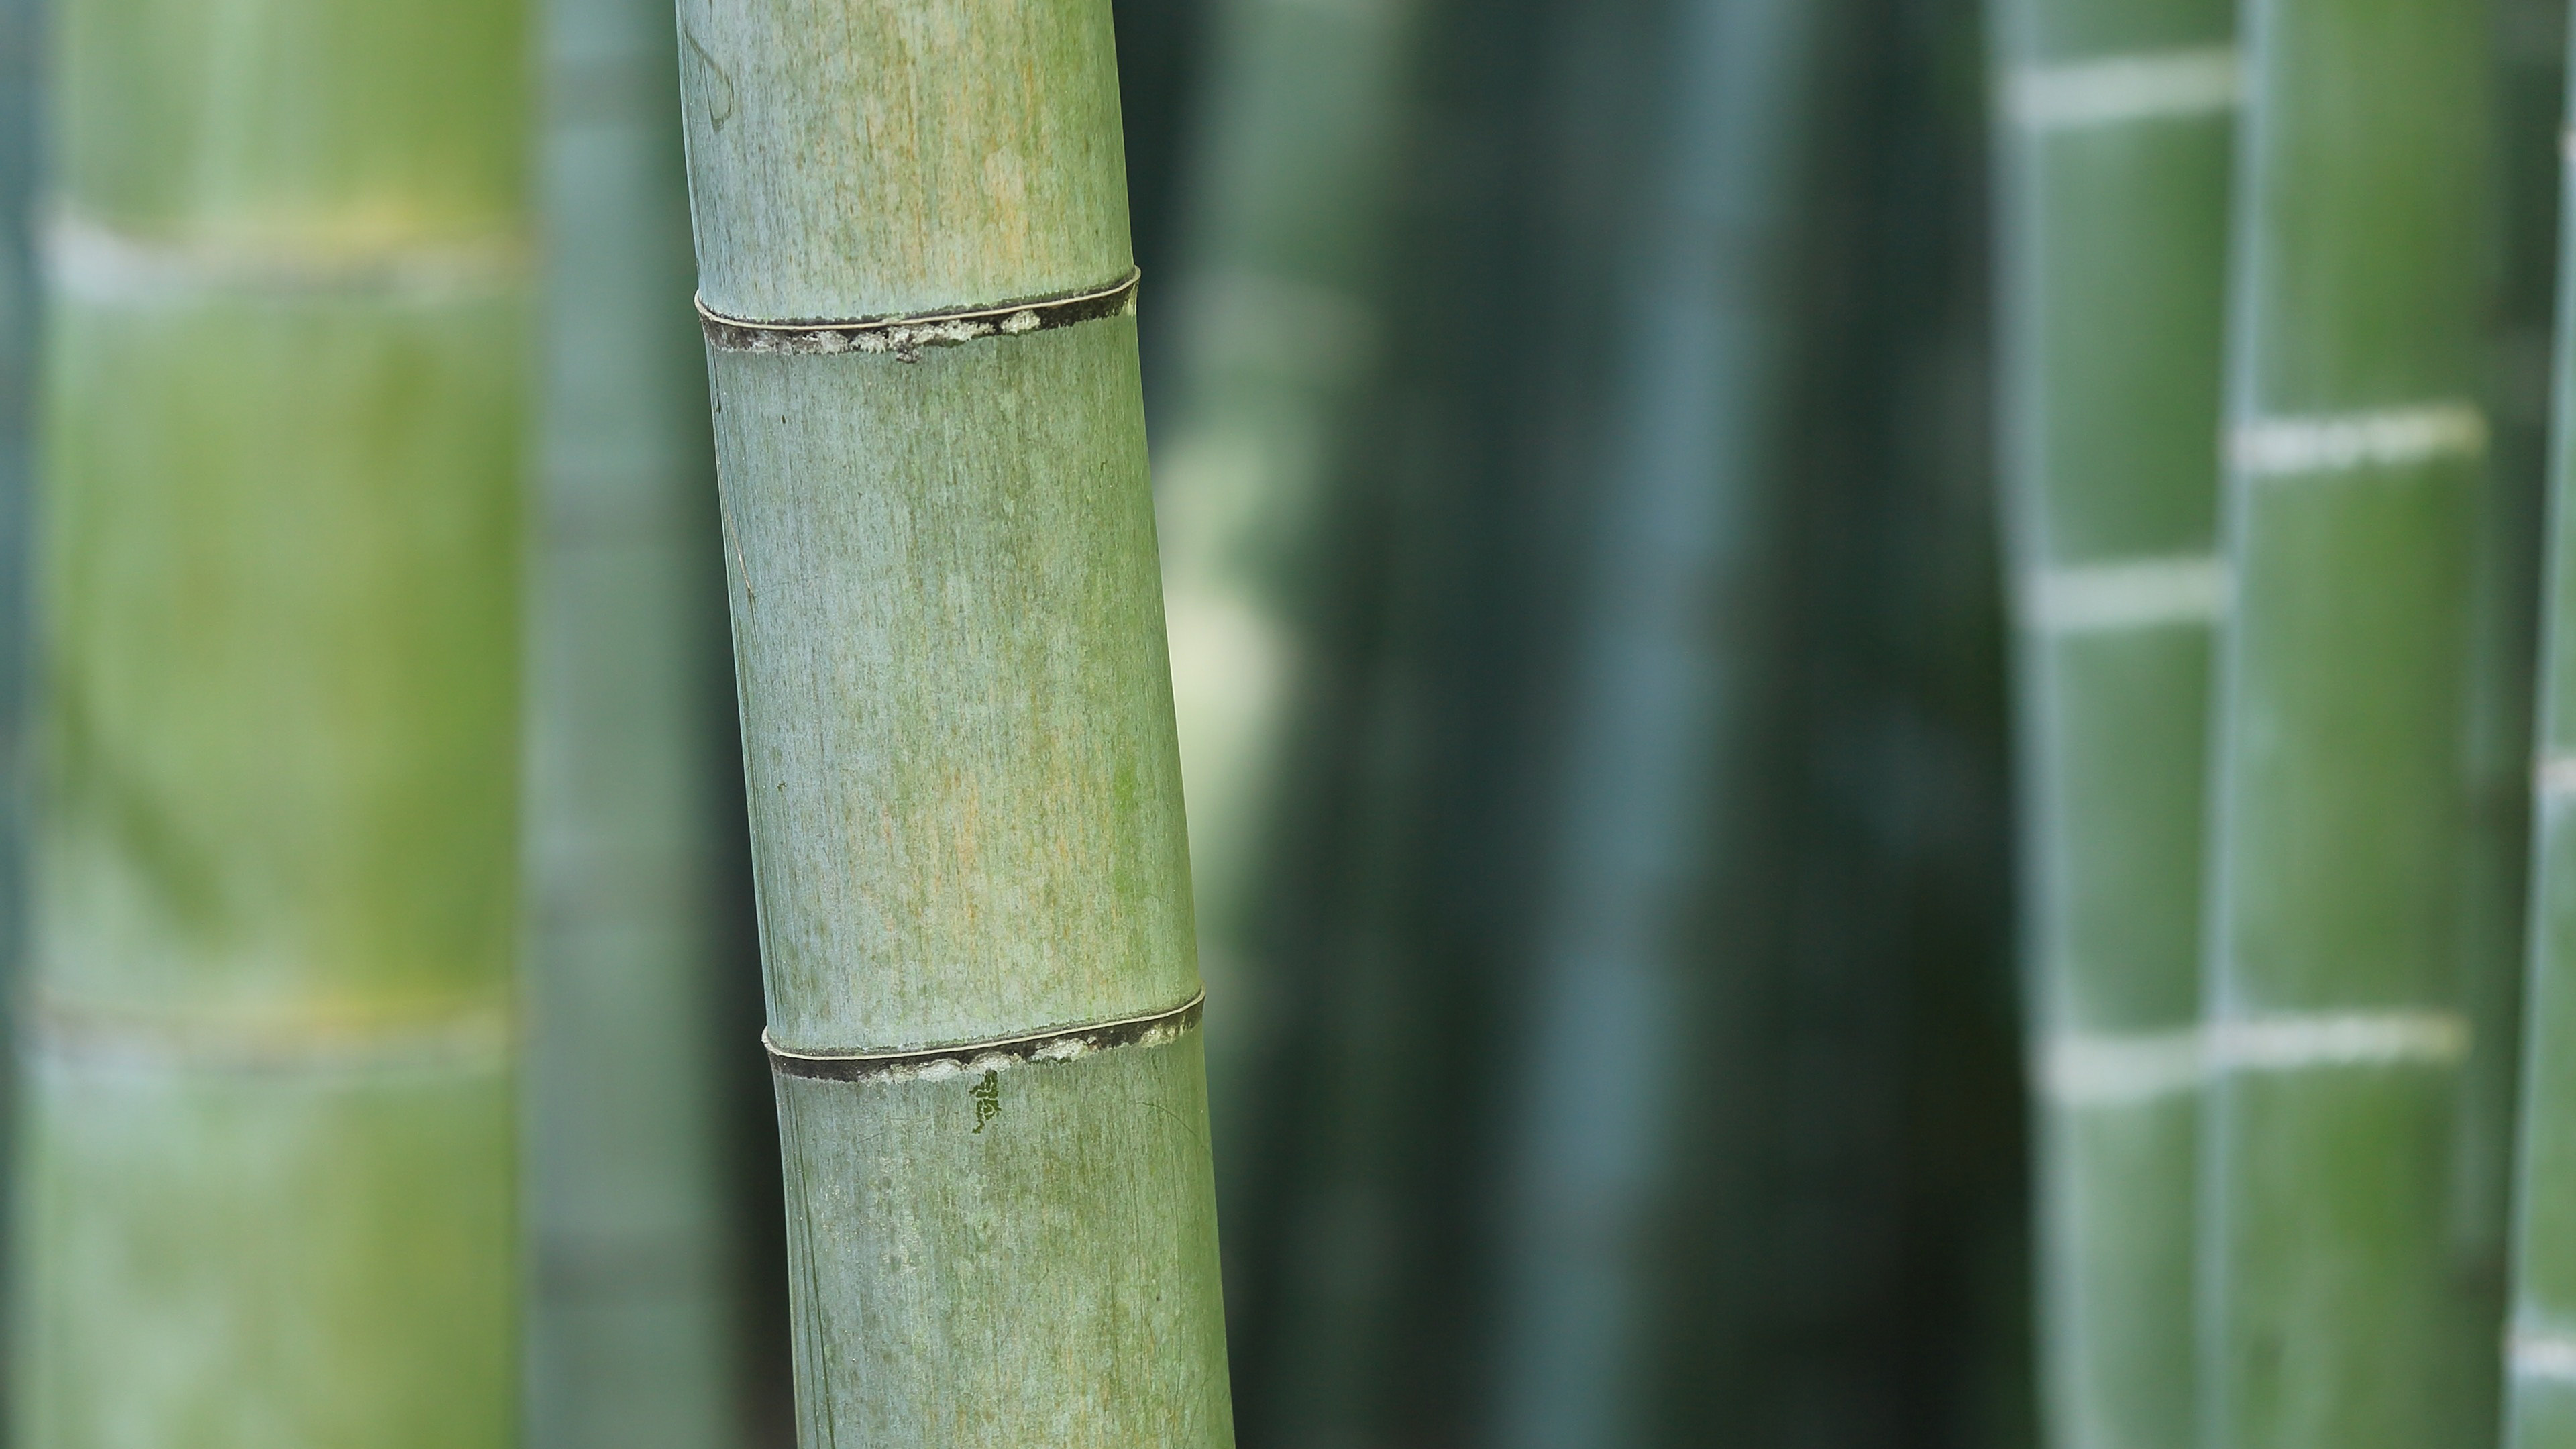 Bamboo: The plant that has notable economic and cultural significance in Asian region, Green trees. 3840x2160 4K Background.